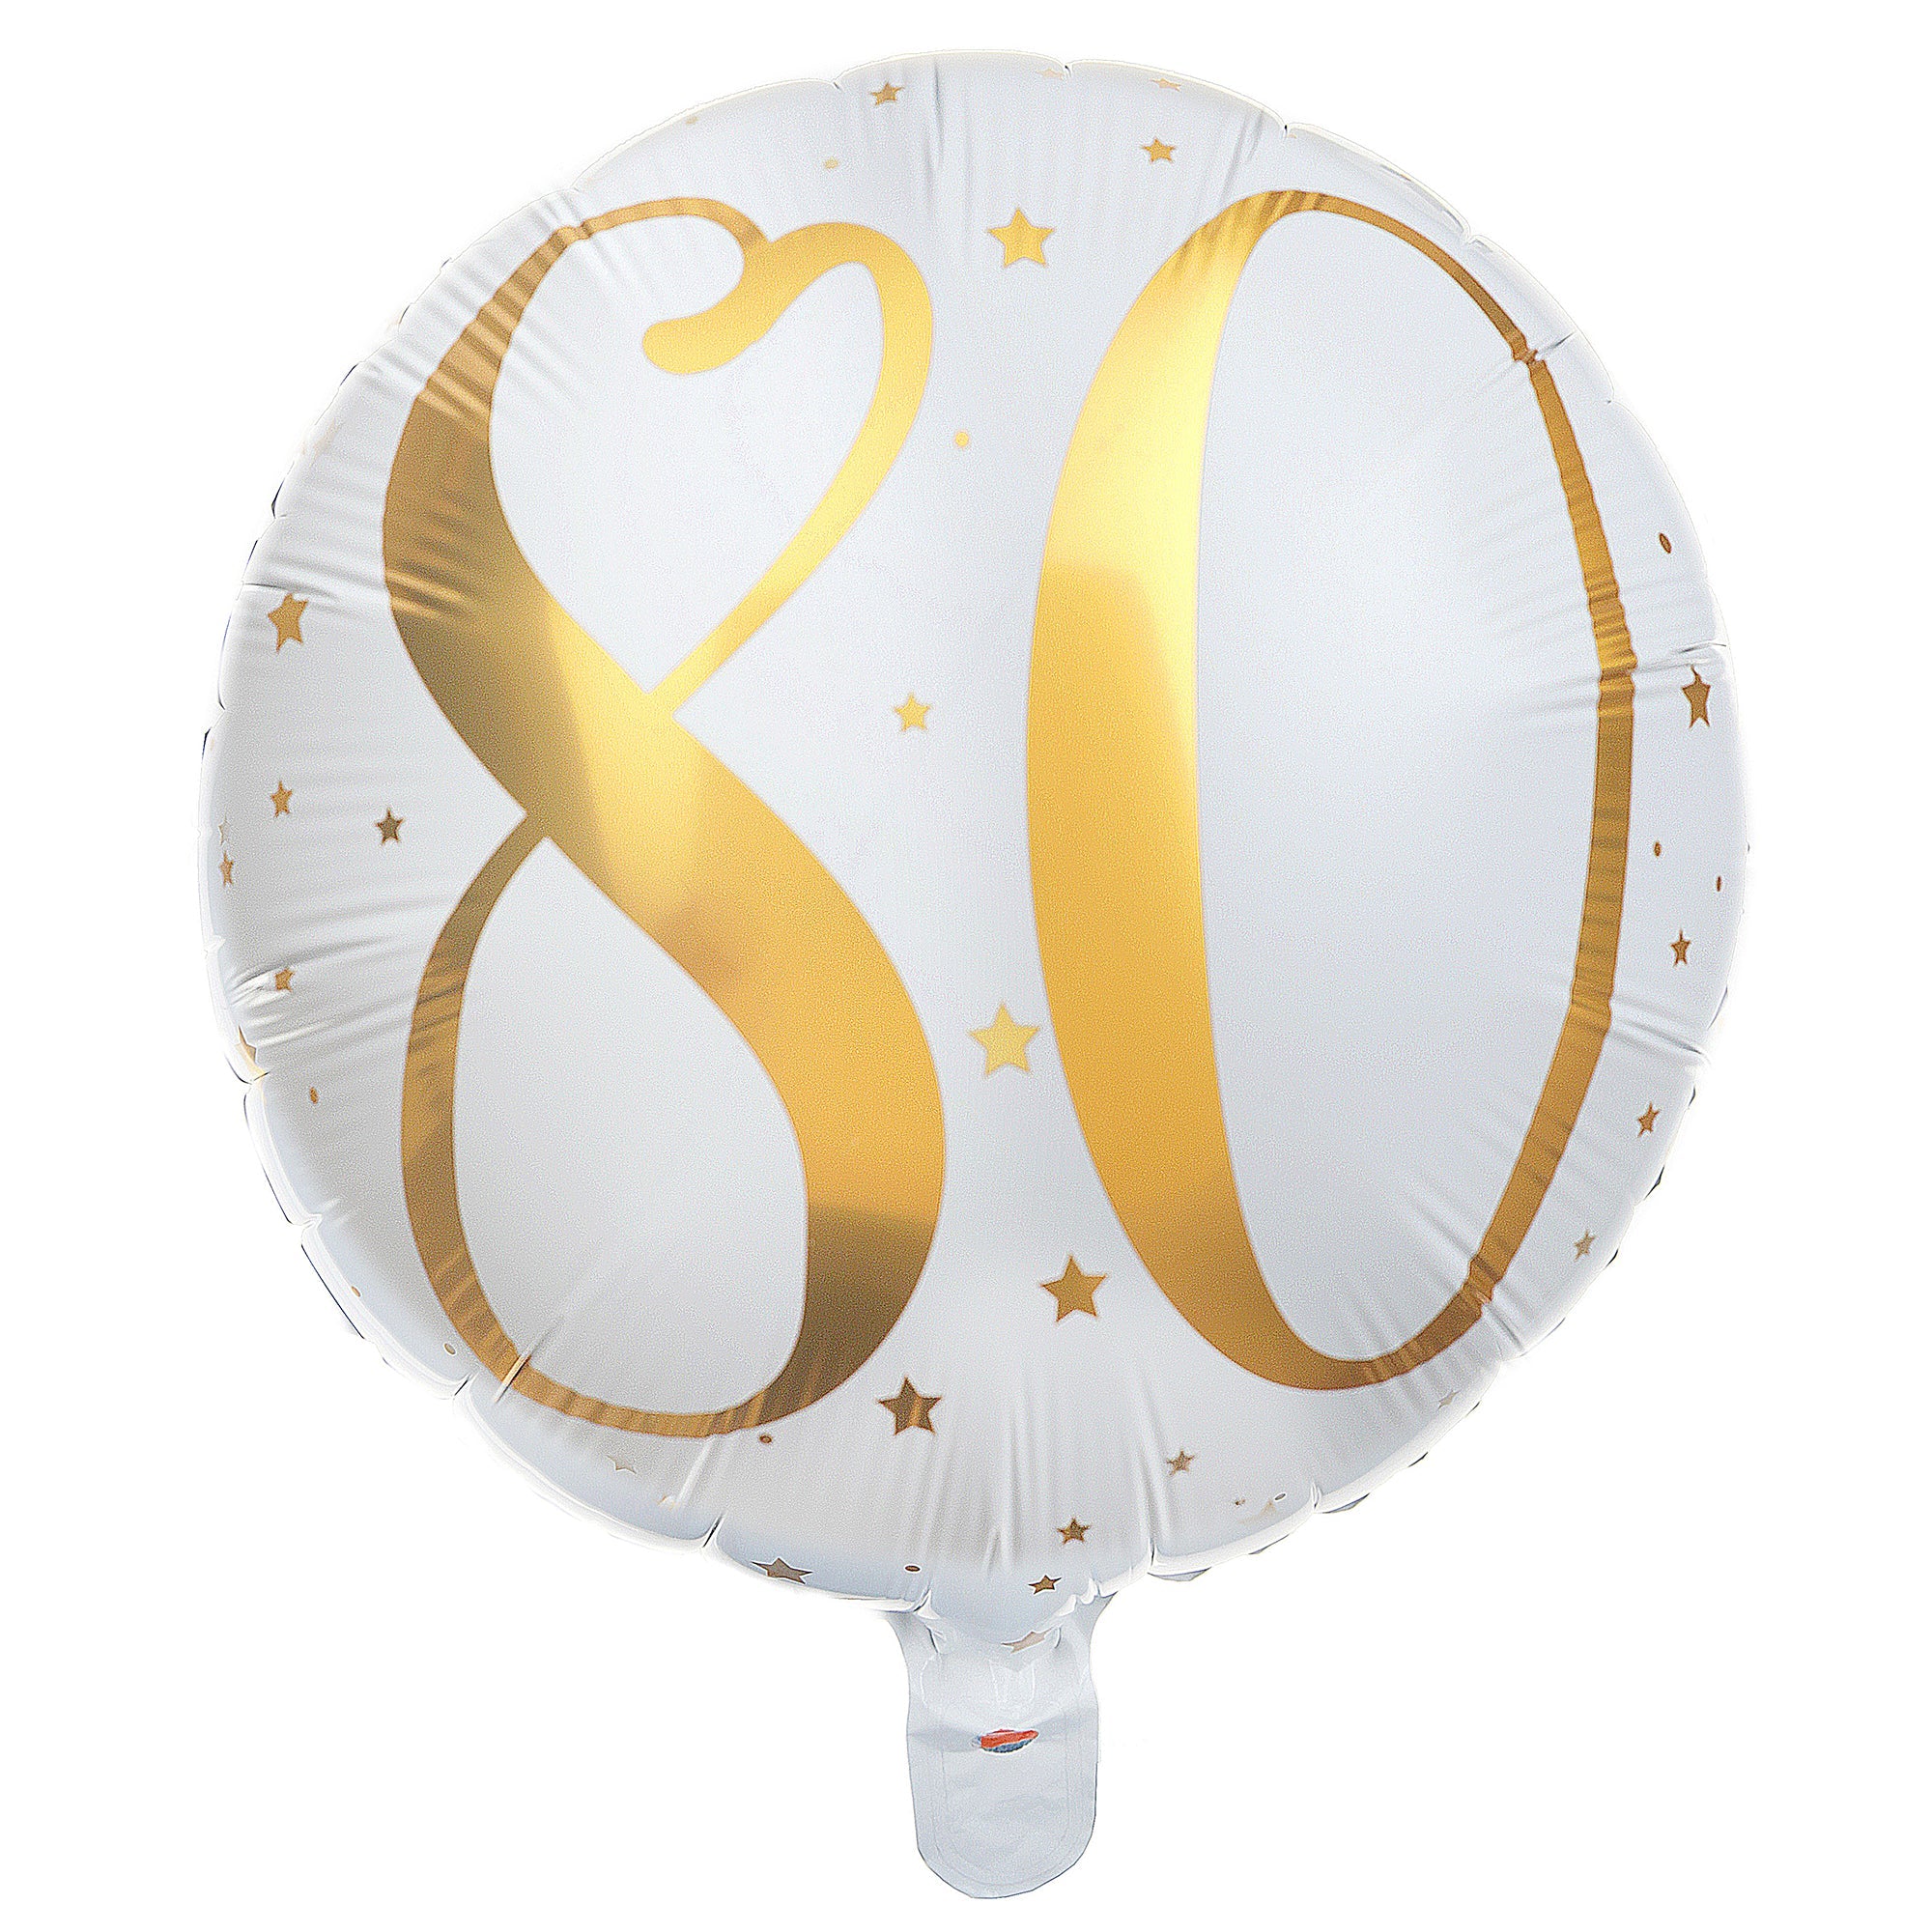 Age 80 Foil Balloon White and Gold 18in